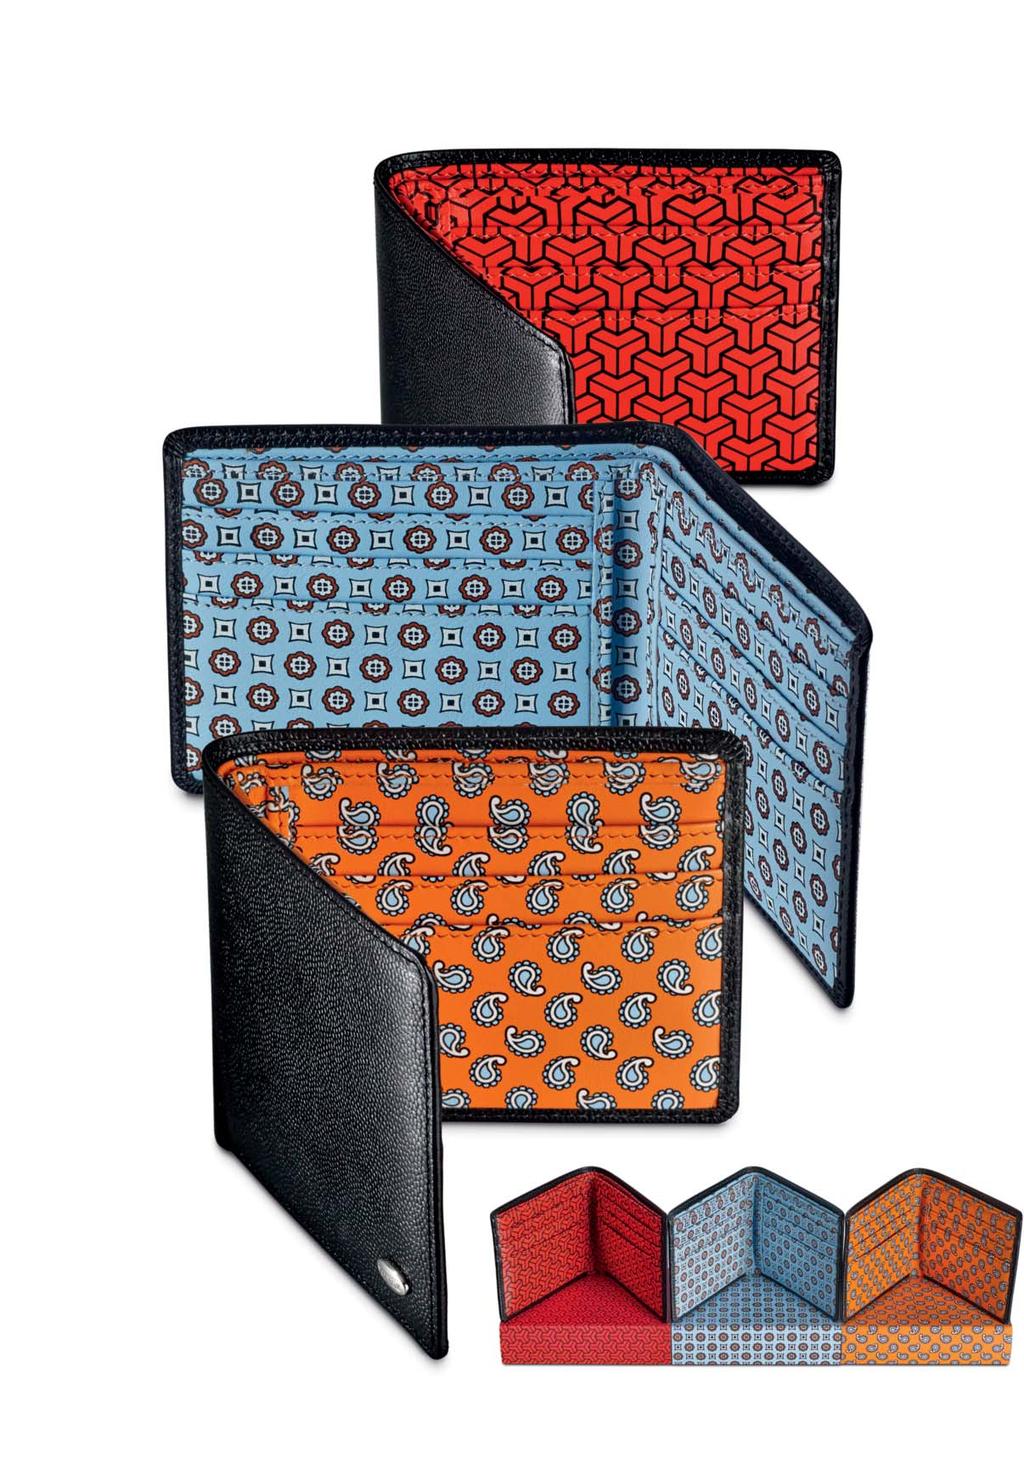 SLIM WALLETS Richly textured Caviar leather combines with meticulously detailed, vibrantly printed interiors to striking effect.